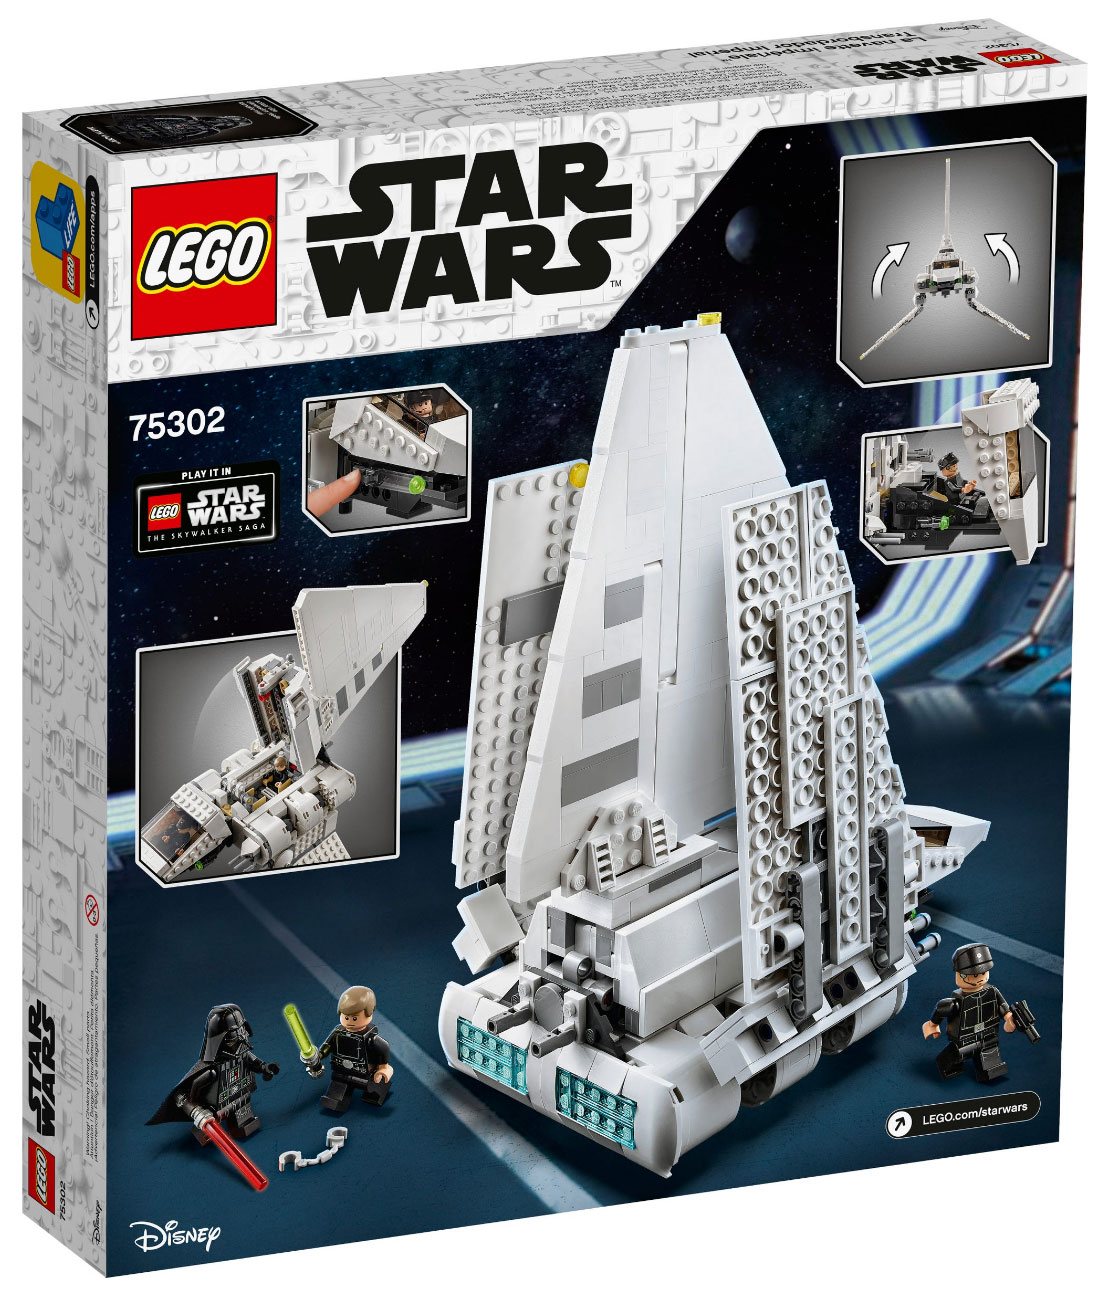 LEGO Star Wars Sets Coming March 2021! | The Brick Post!